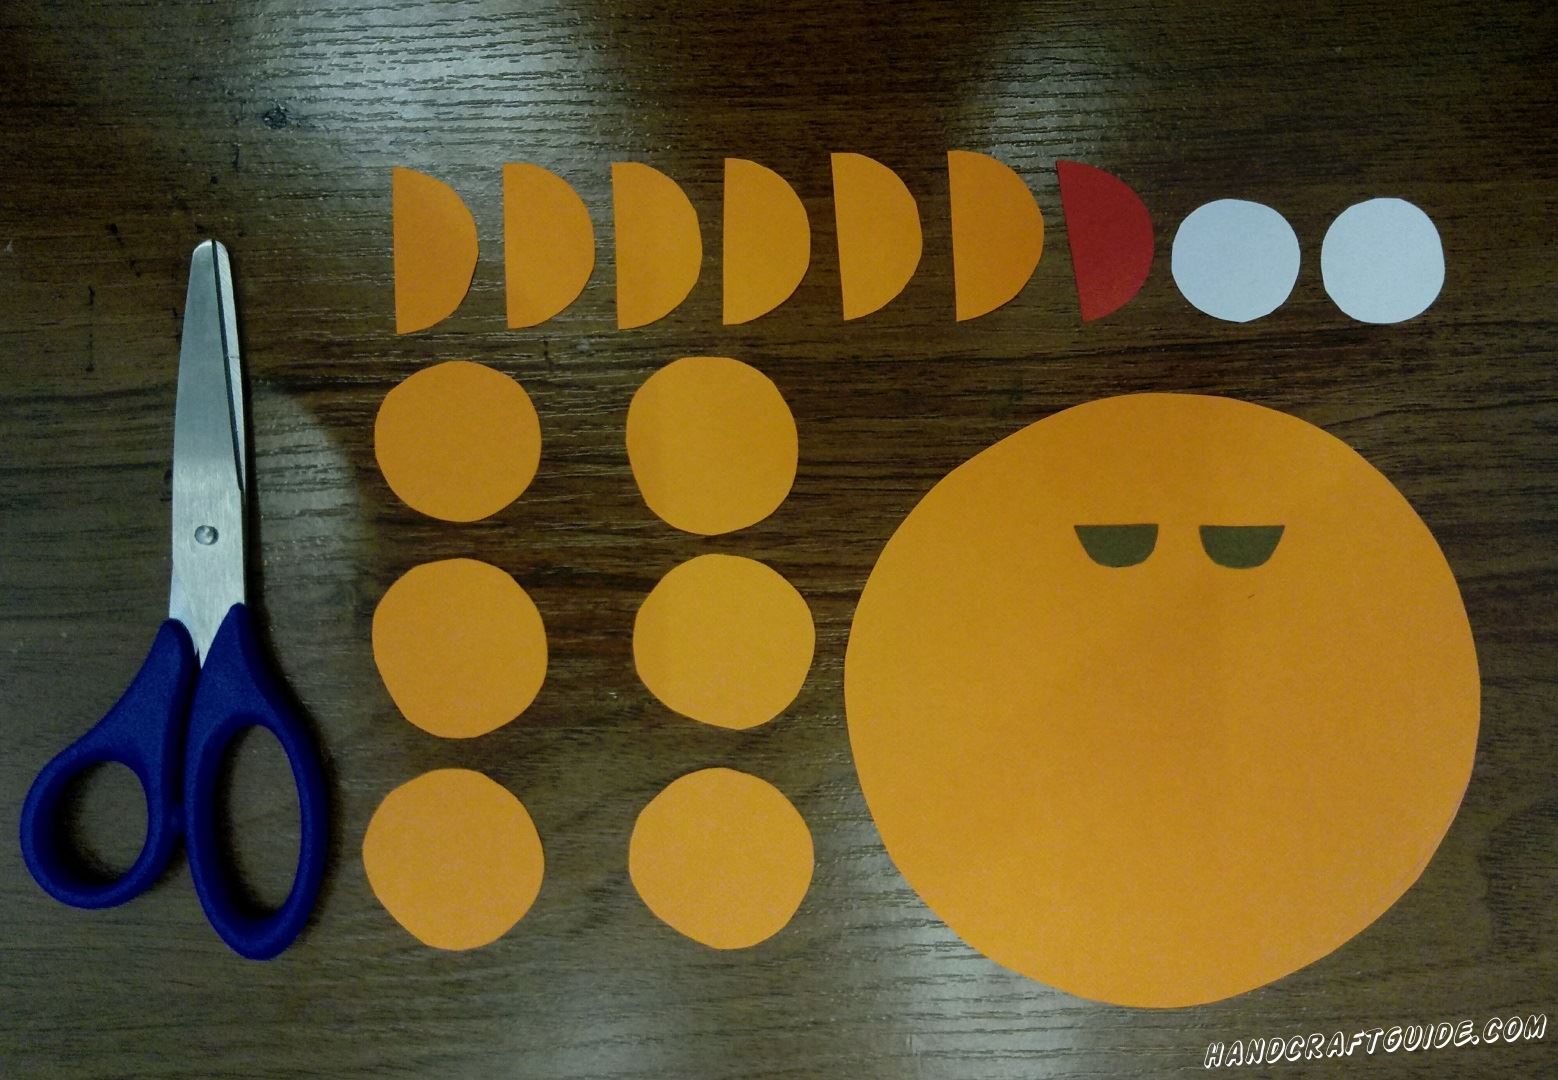 Cut out of the orange paper one large circle, two strips, six small and another 6 identical semicircles. One semicircle burgundy or red. Two white circles and one small black circle cut in half.